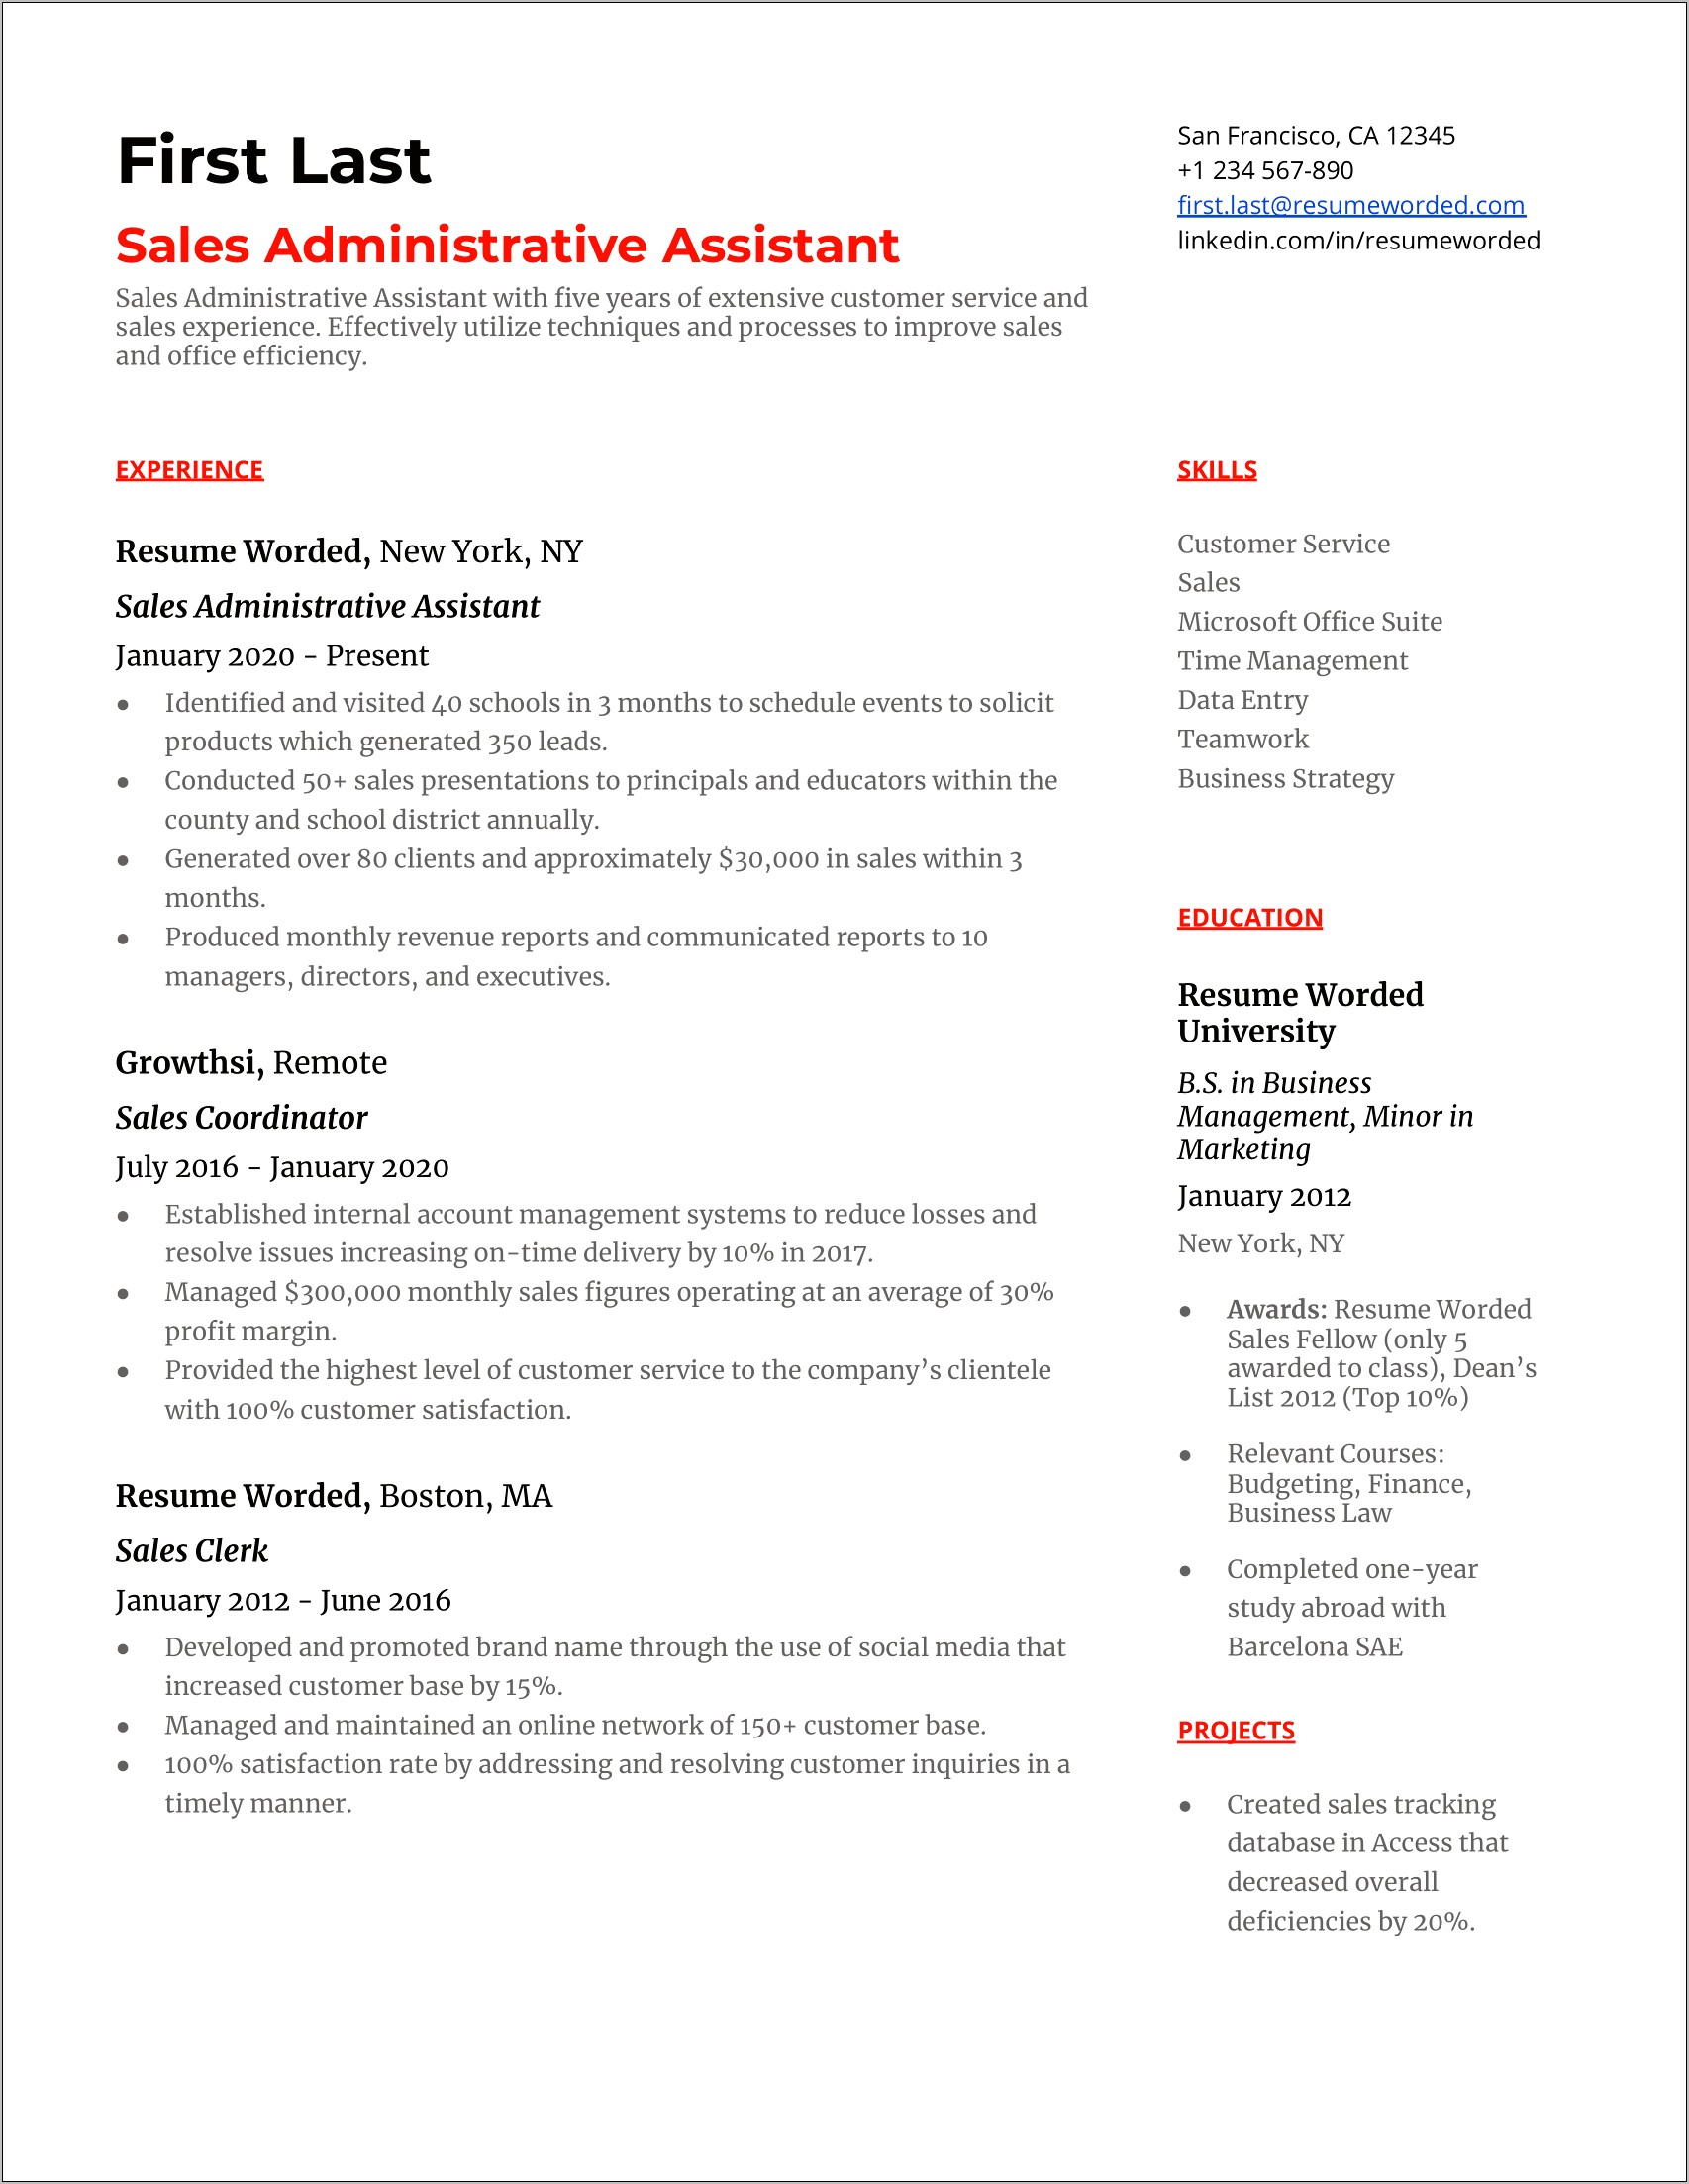 Resume Objective Statement For Entry Level Administrative Assistant